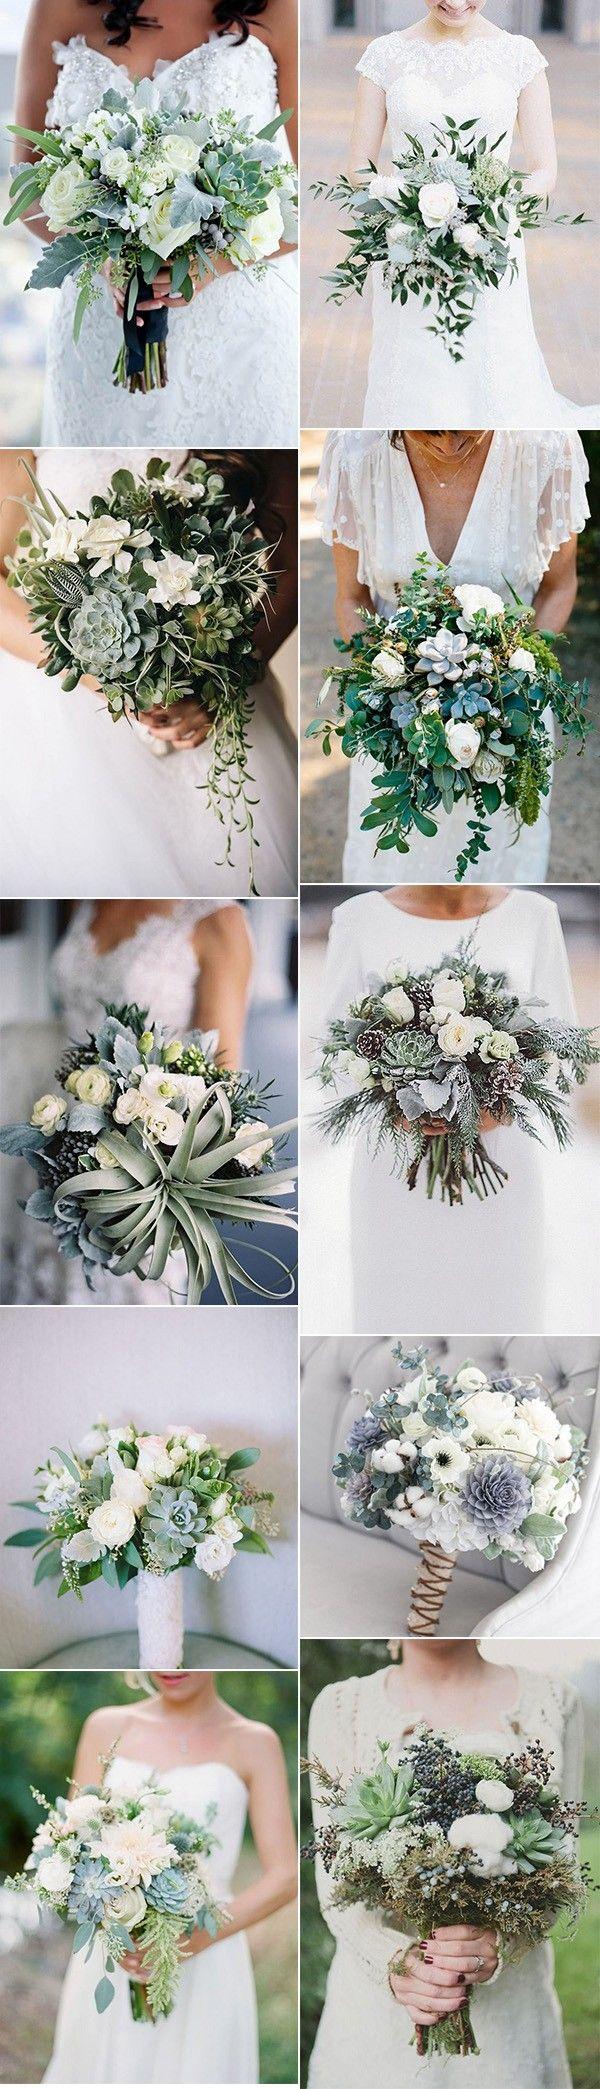 Mariage - 20 Trending Wedding Bouquet Ideas With Succulents